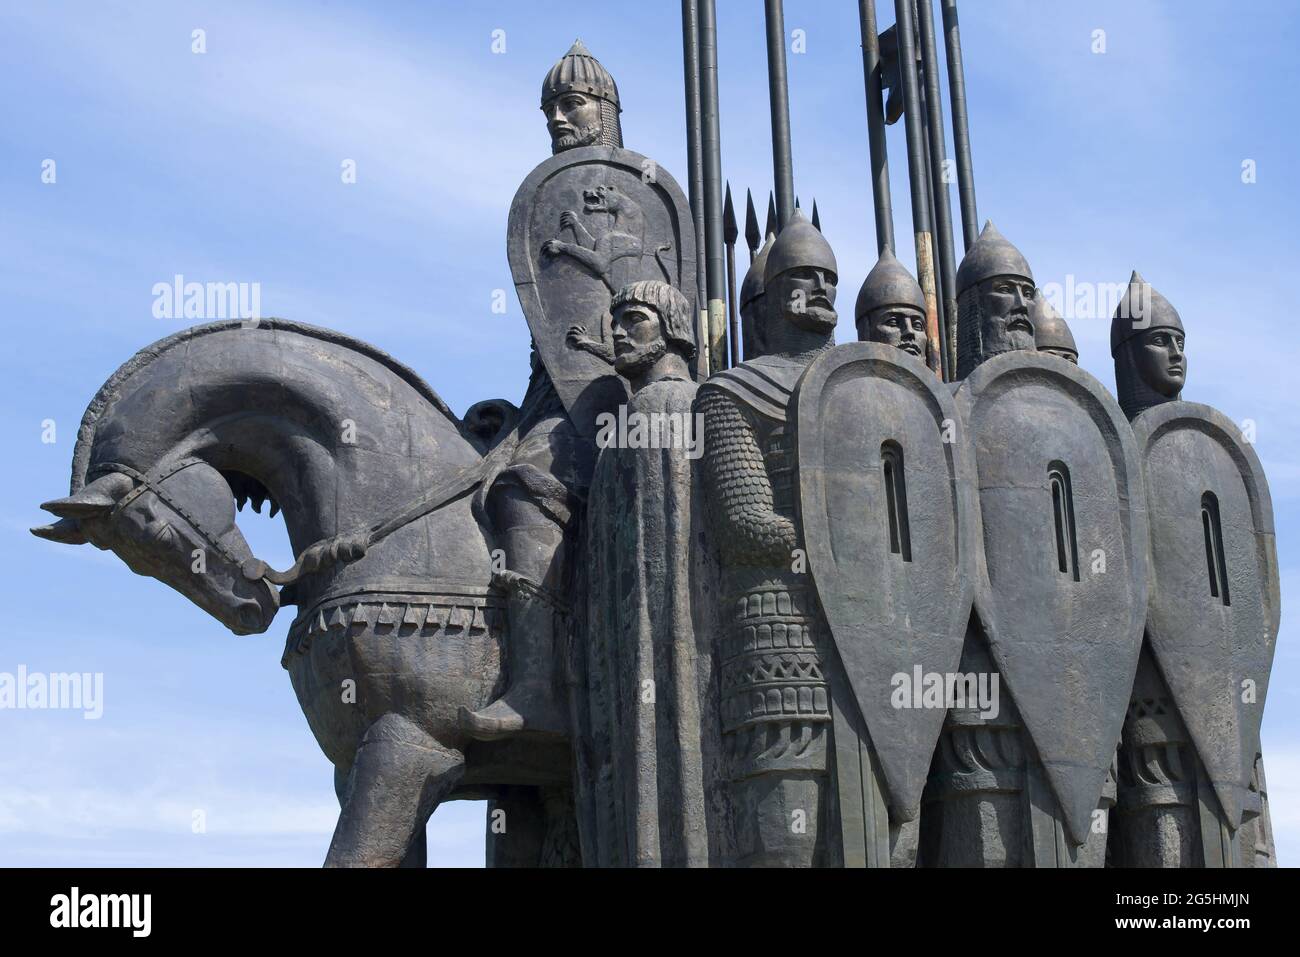 PSKOV, RUSSIA - JUNE 11, 2018: Alexander Nevsky with a squad. Fragment of the memorial 'Ice Slaughter' on Mount Sokolikha Stock Photo